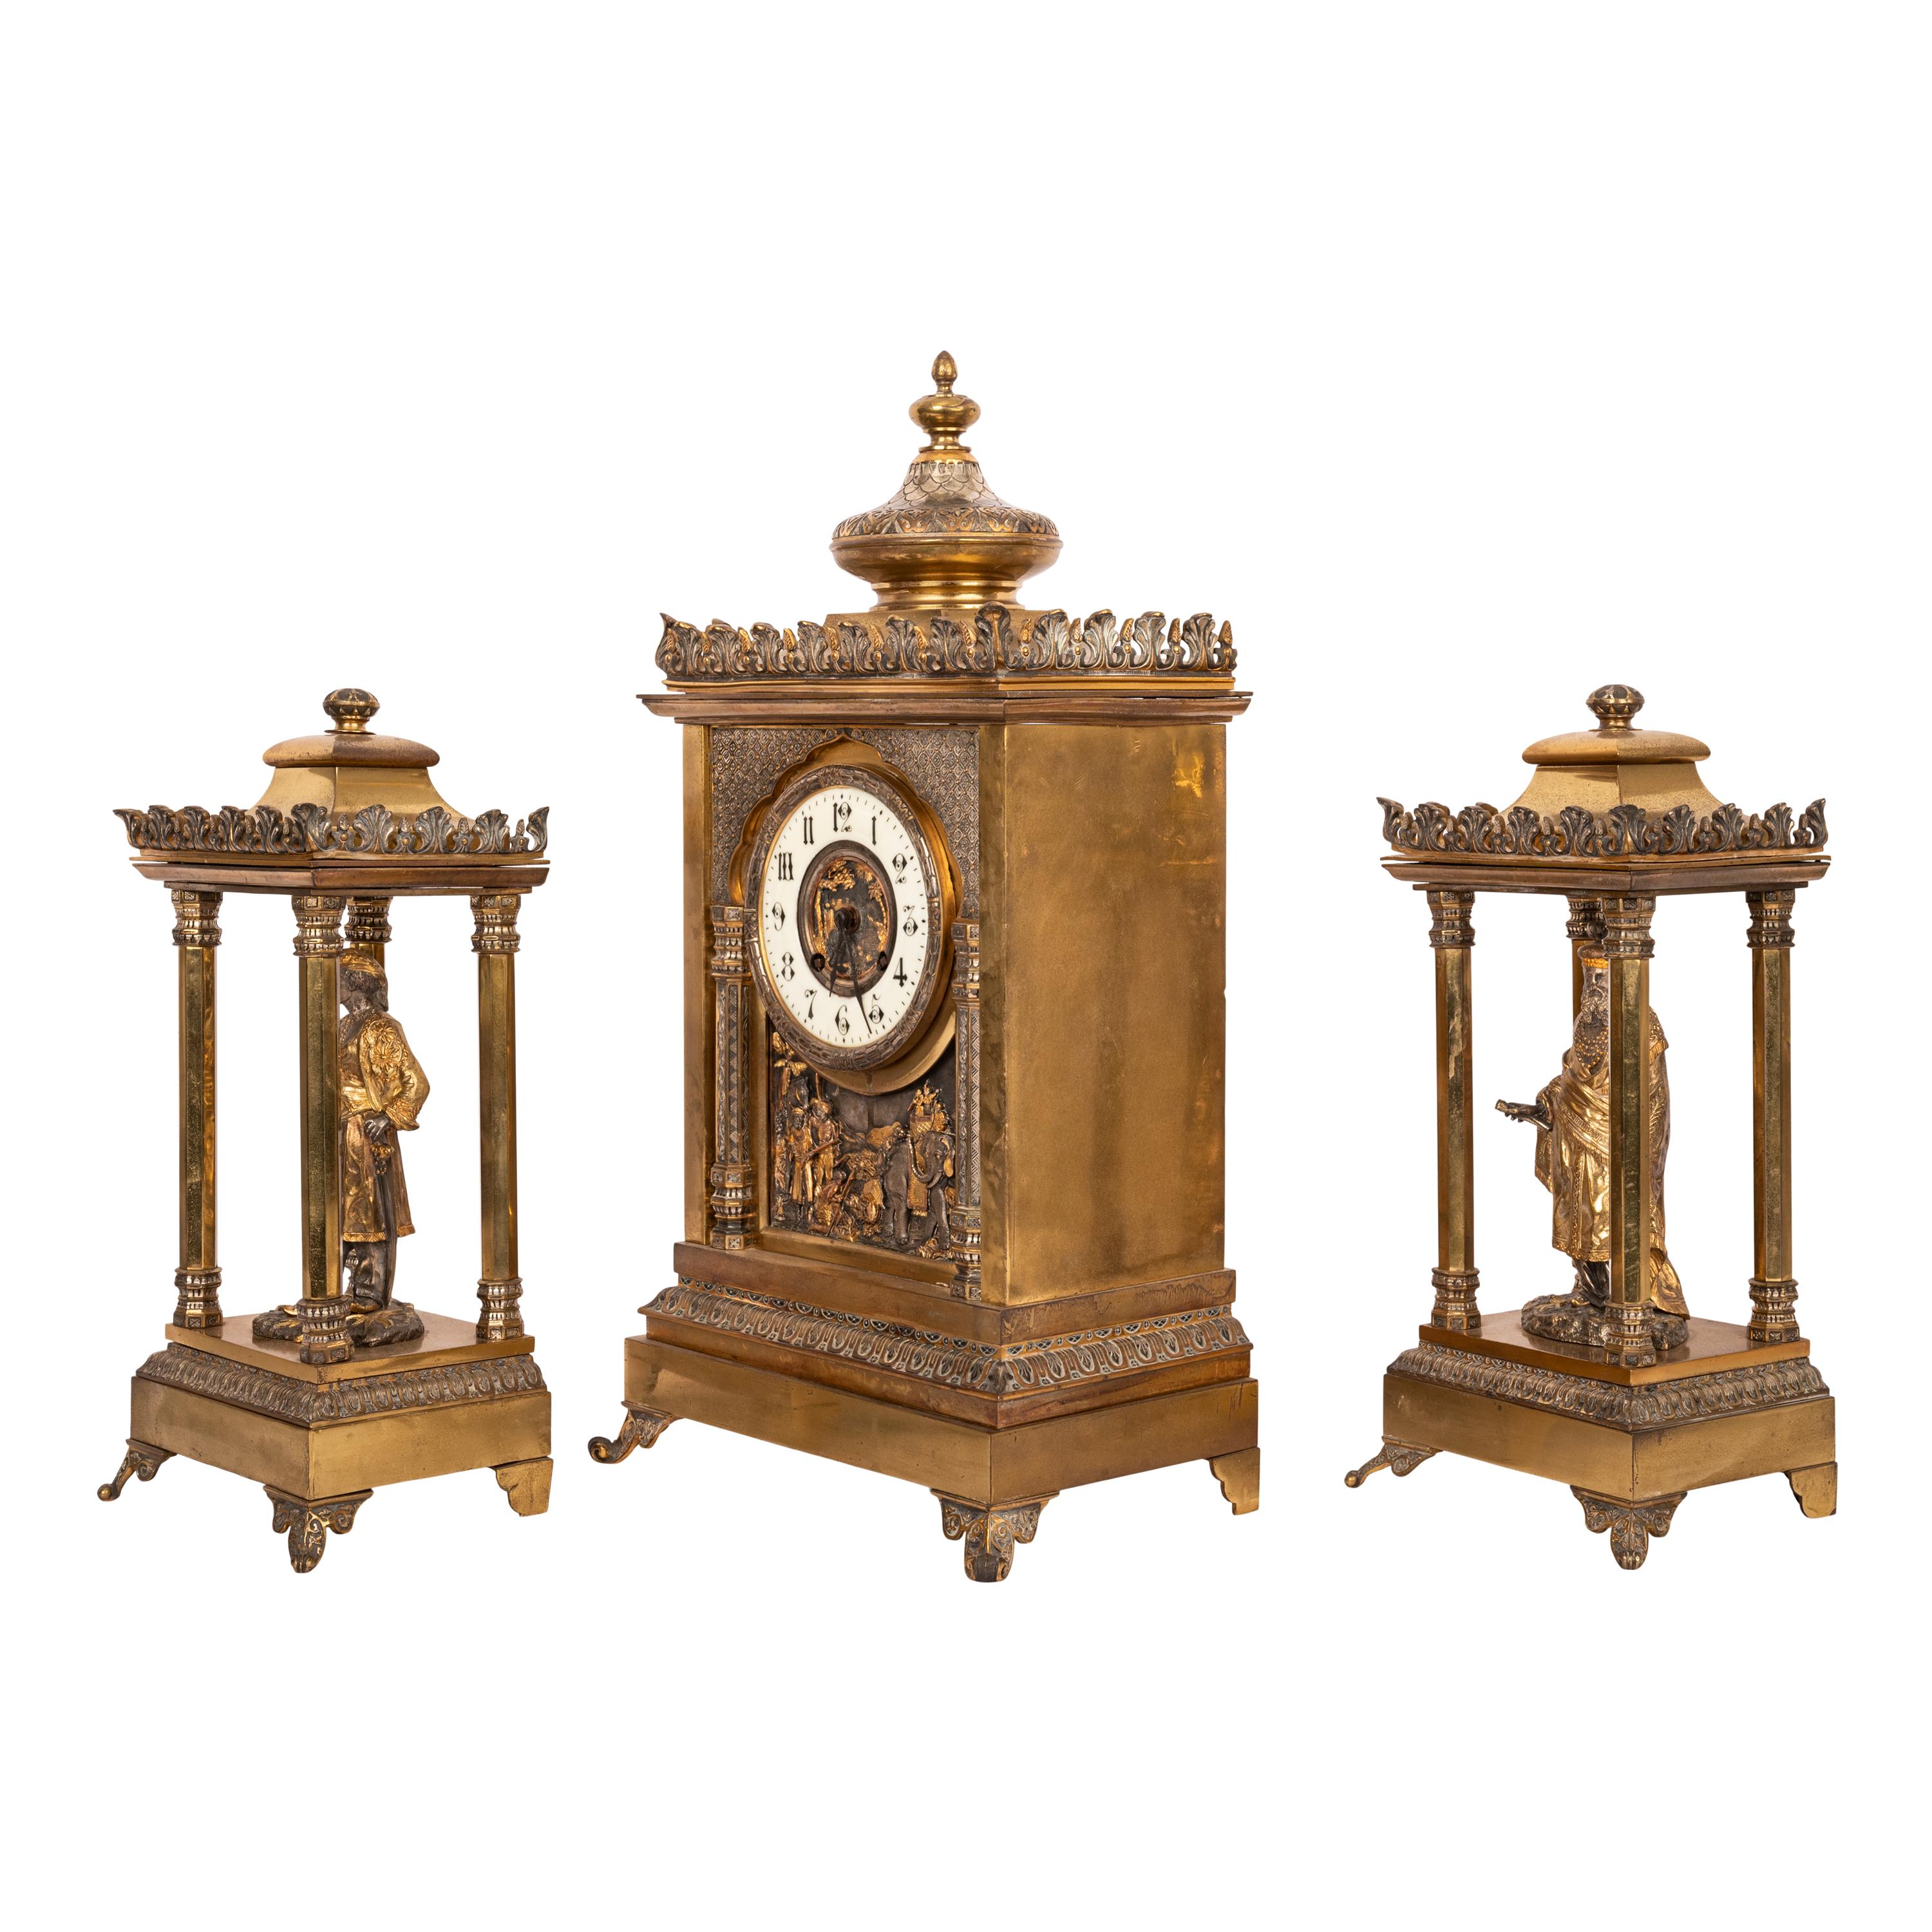 A Fine & important French bronze statue 8 day clock garniture in the Orientalist style, circa 1880. 
The 8 day clock with a time and strike mechanism, sounding the hours and half hours on a pleasant mellow sounding bell. The clock is house in a